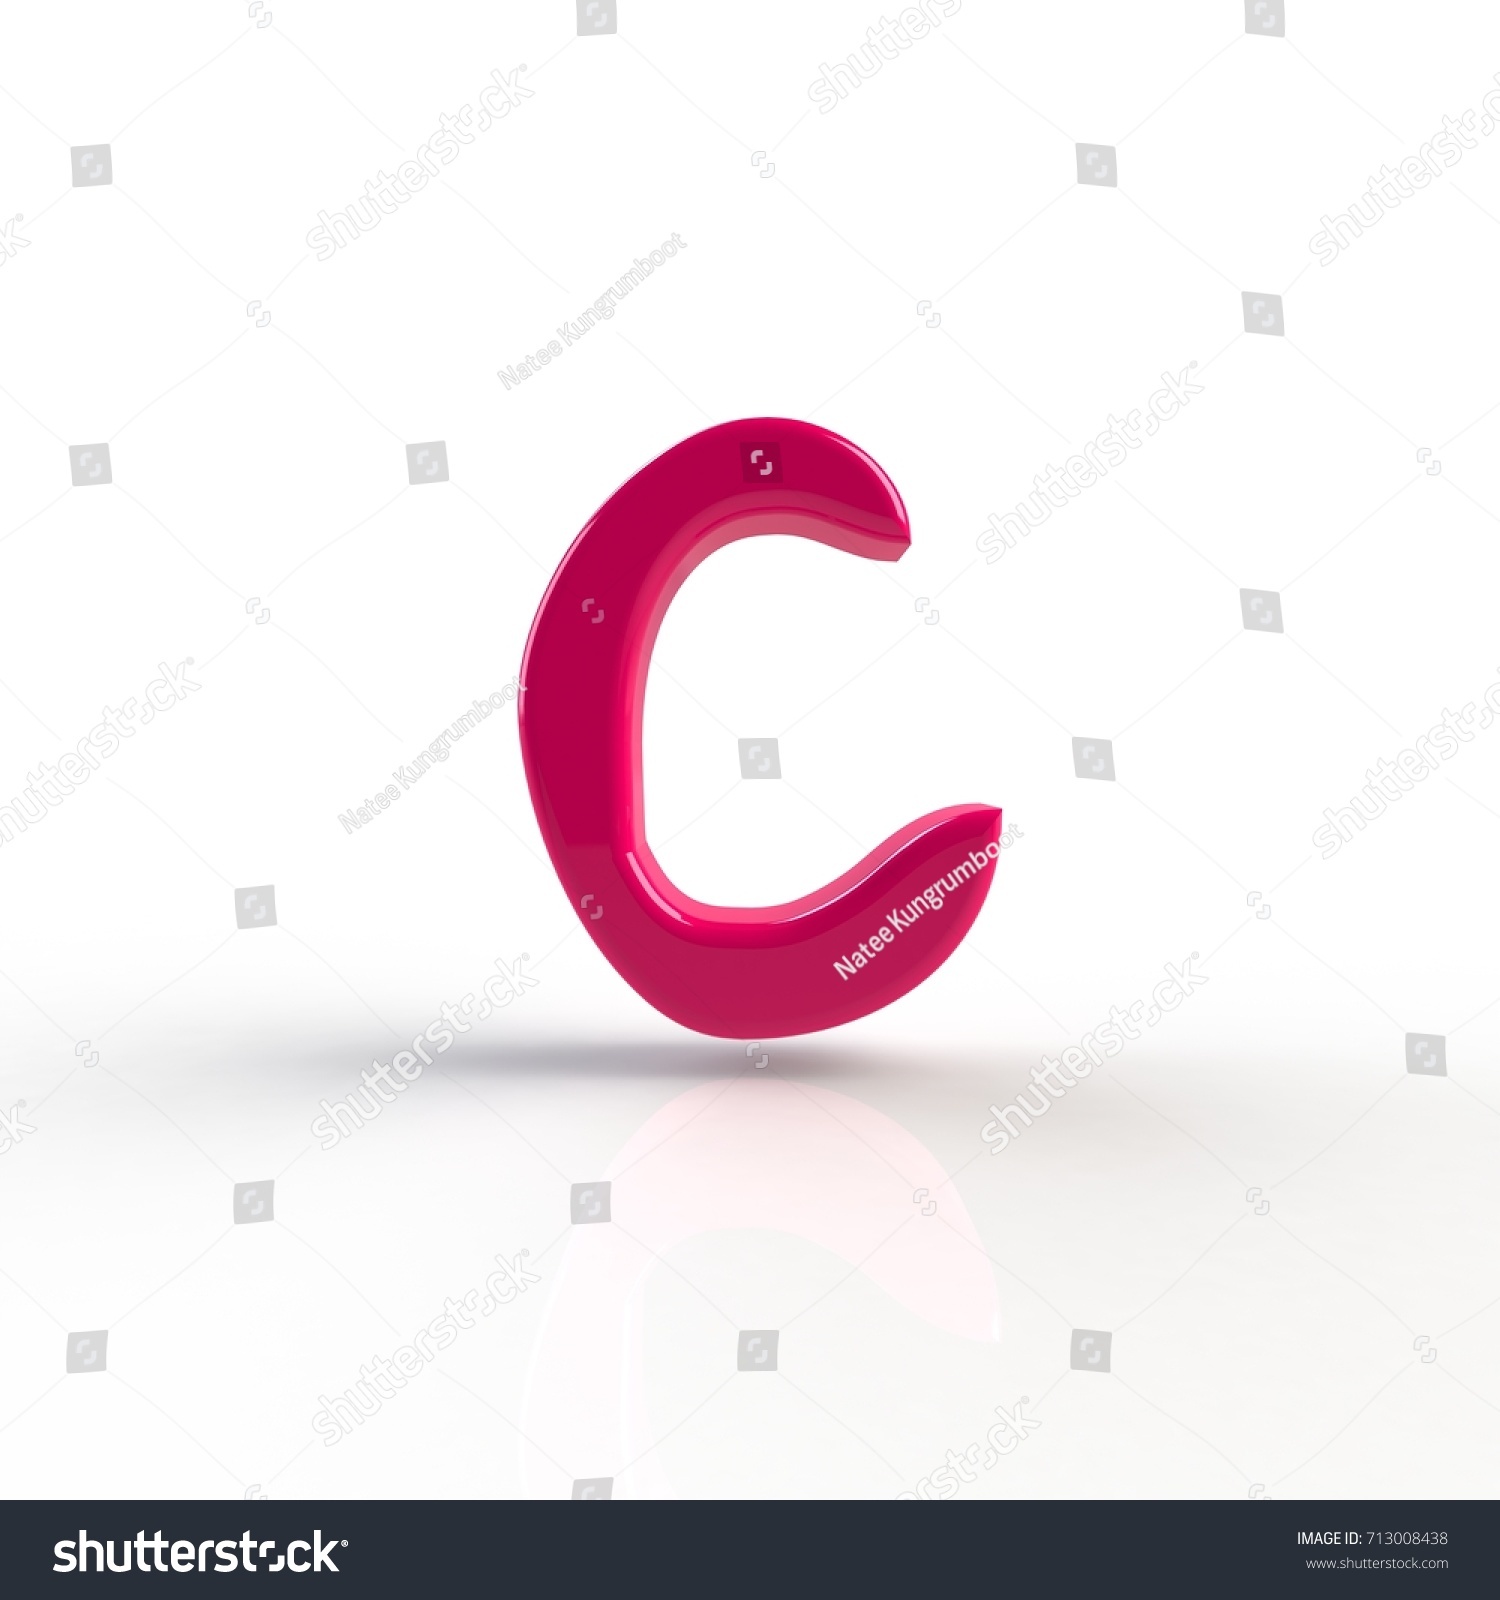 Glossy Yellow Paint Letter C Lowercase Stock Illustration 713008438